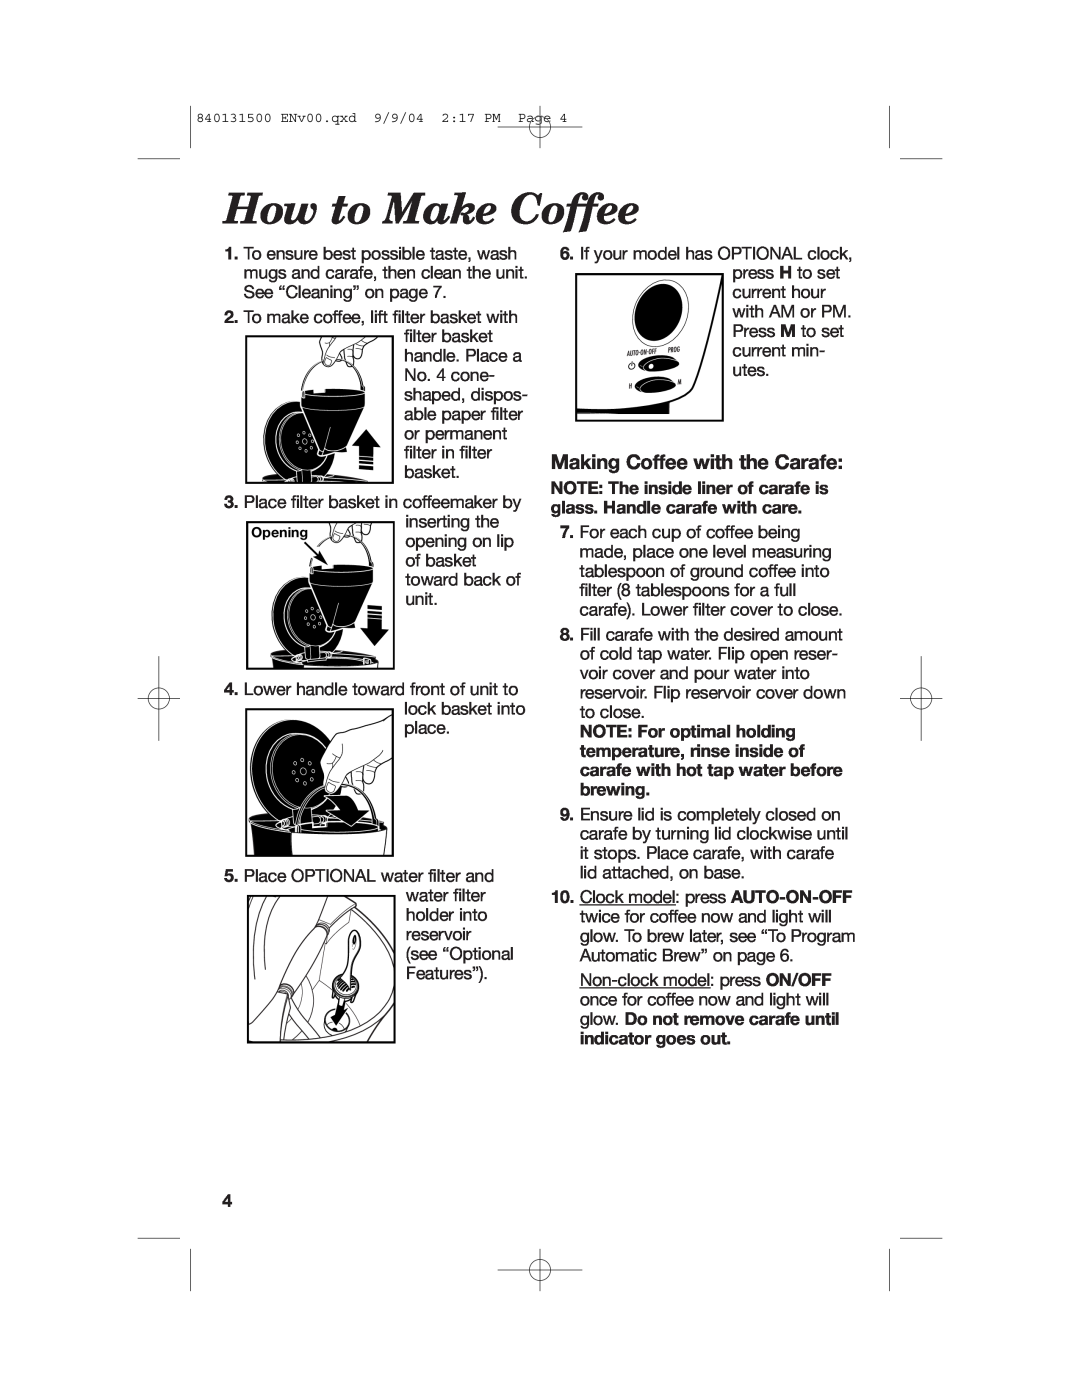 Hamilton Beach Stay or Go Coffeemaker manual How to Make Coffee, Making Coffee with the Carafe 